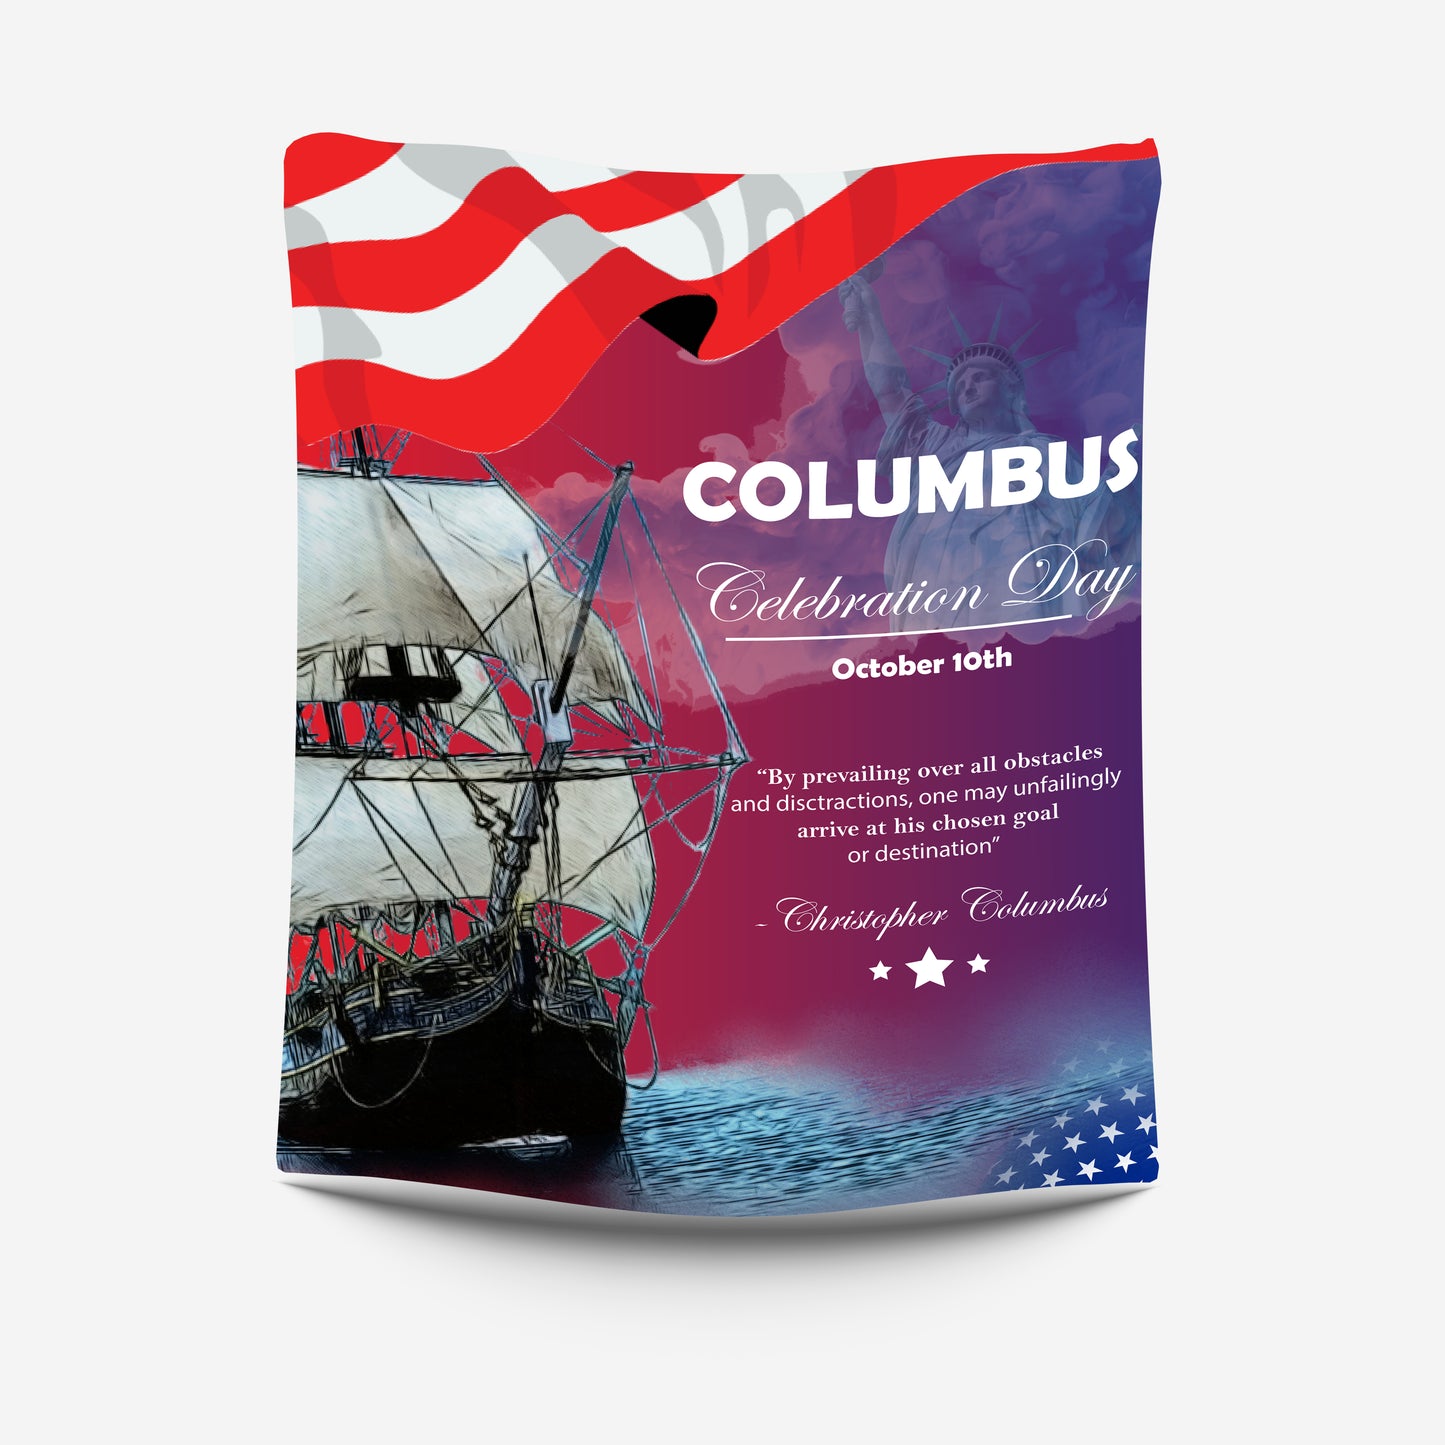 On The Celebration of Columbus Day, Blanket is Design by Seerat.